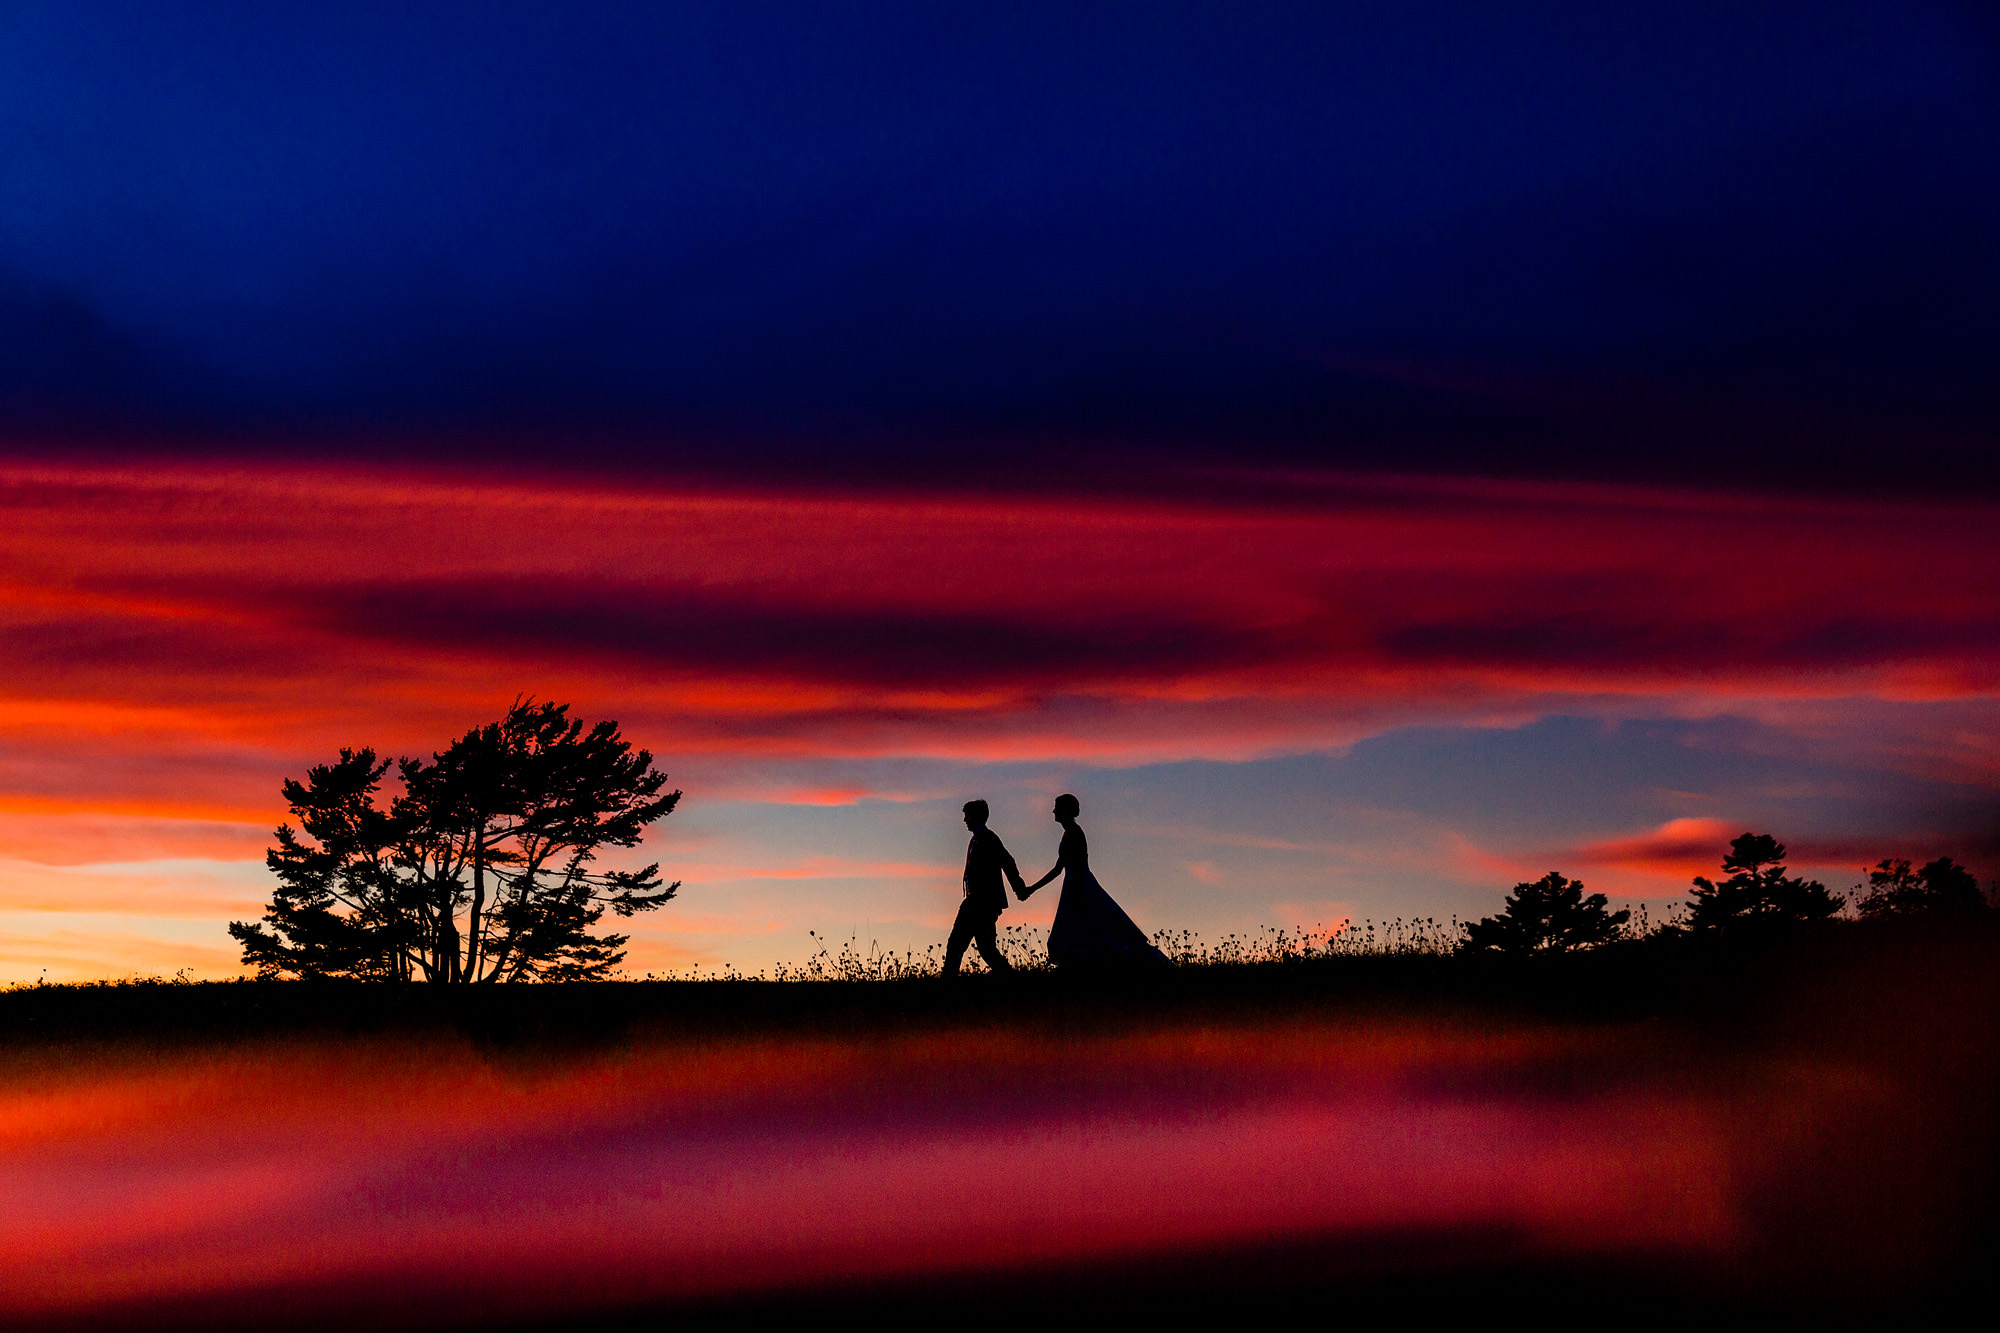 A creative wedding day portrait of the bride and groom taken at sunset in Maine